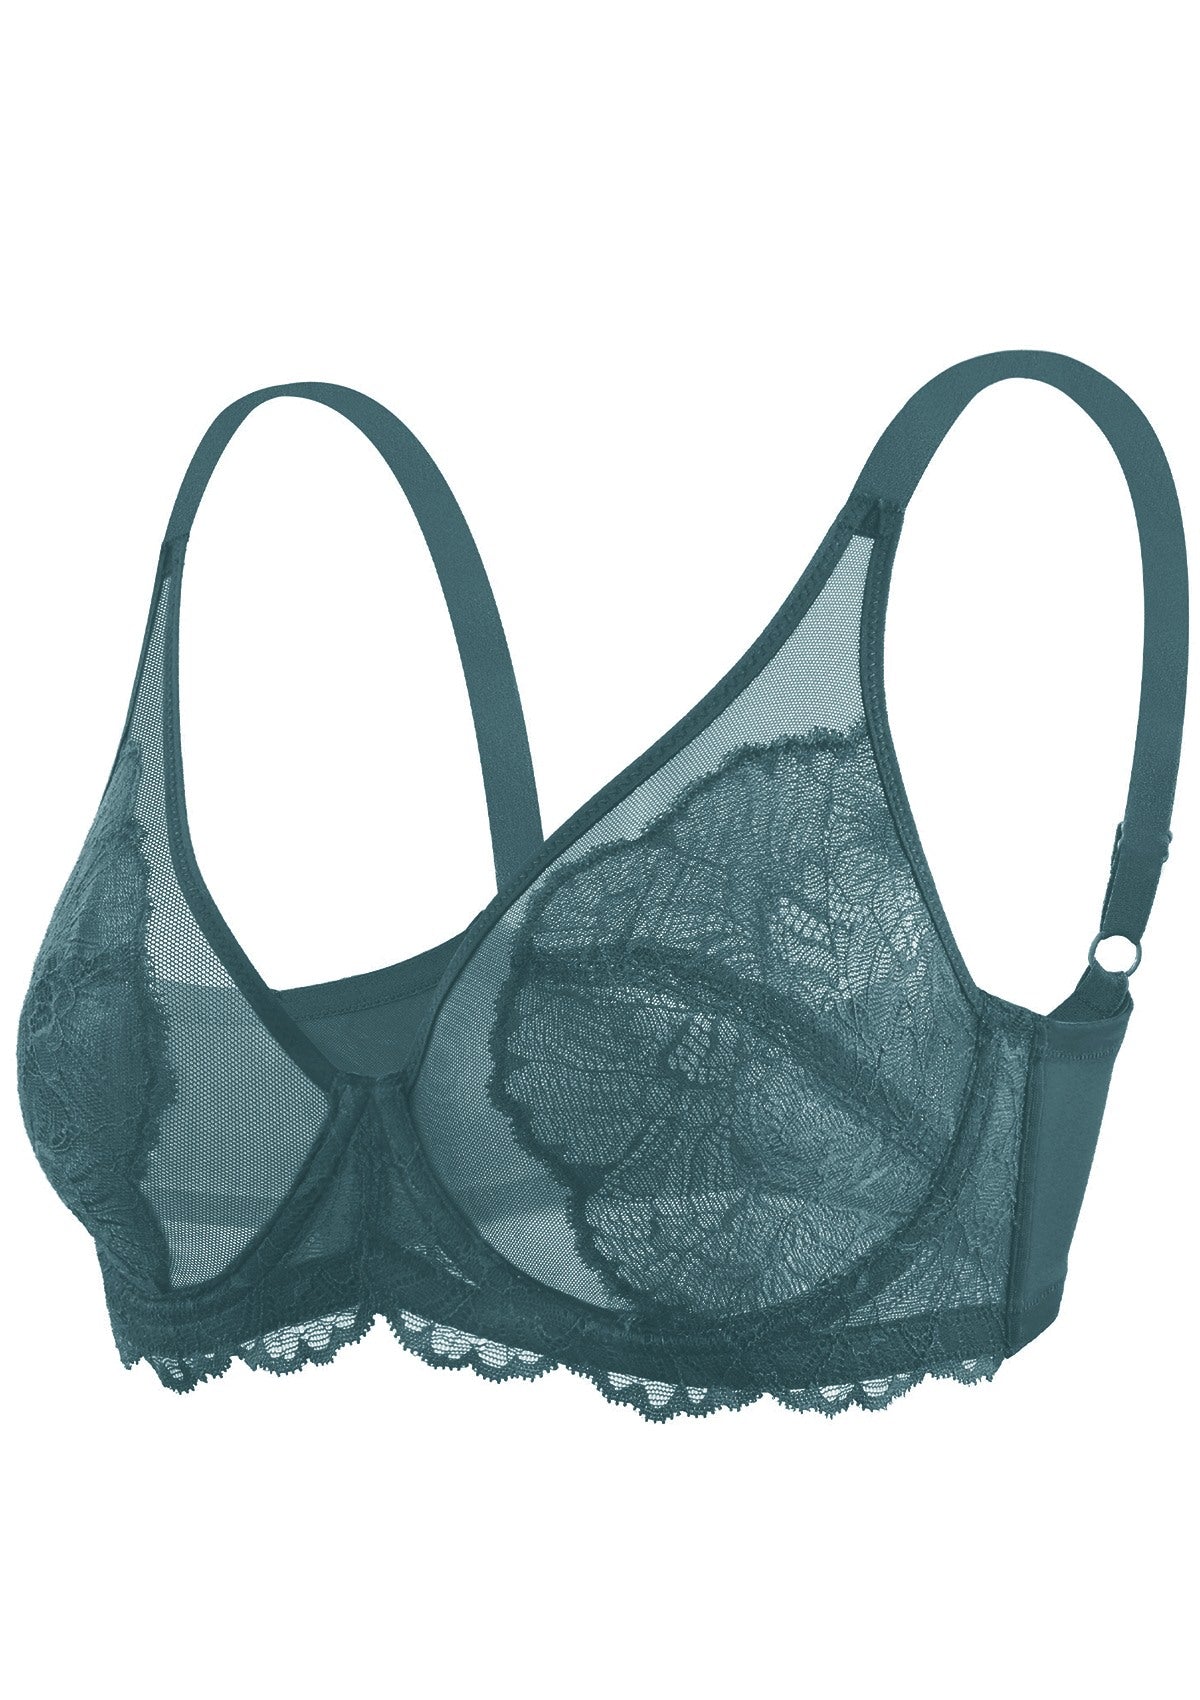 HSIA Blossom Full Figure See-Through Lace Bra For Side And Back Fat - Biscay Blue / 40 / DD/E